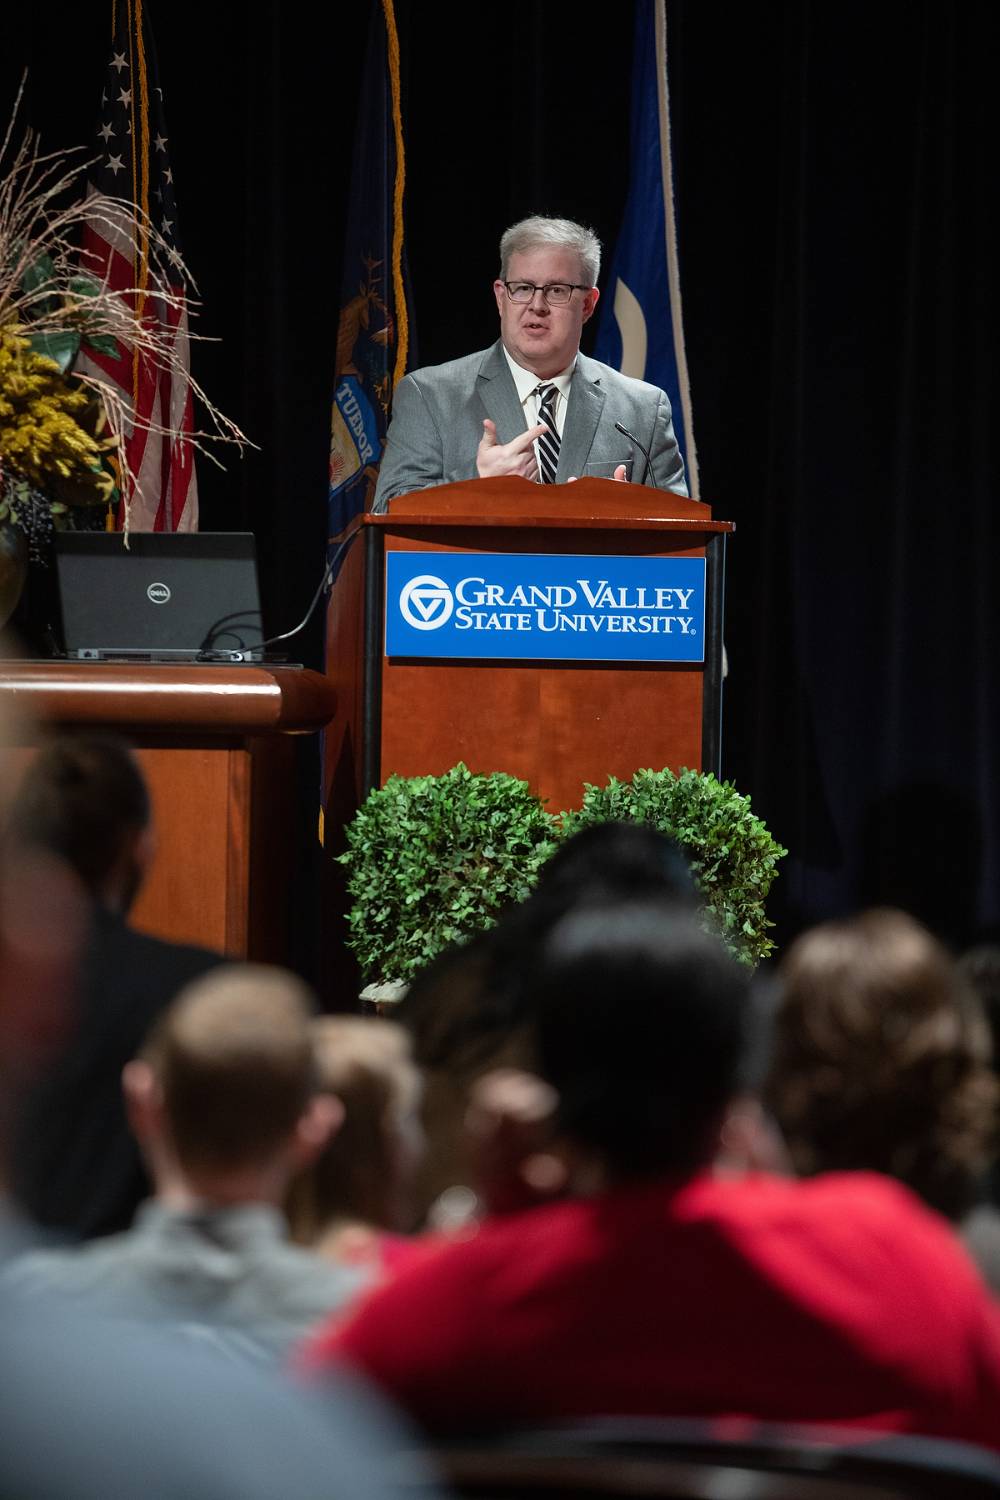 Man stands at a GVSU podium, talking and gesturing with his hands